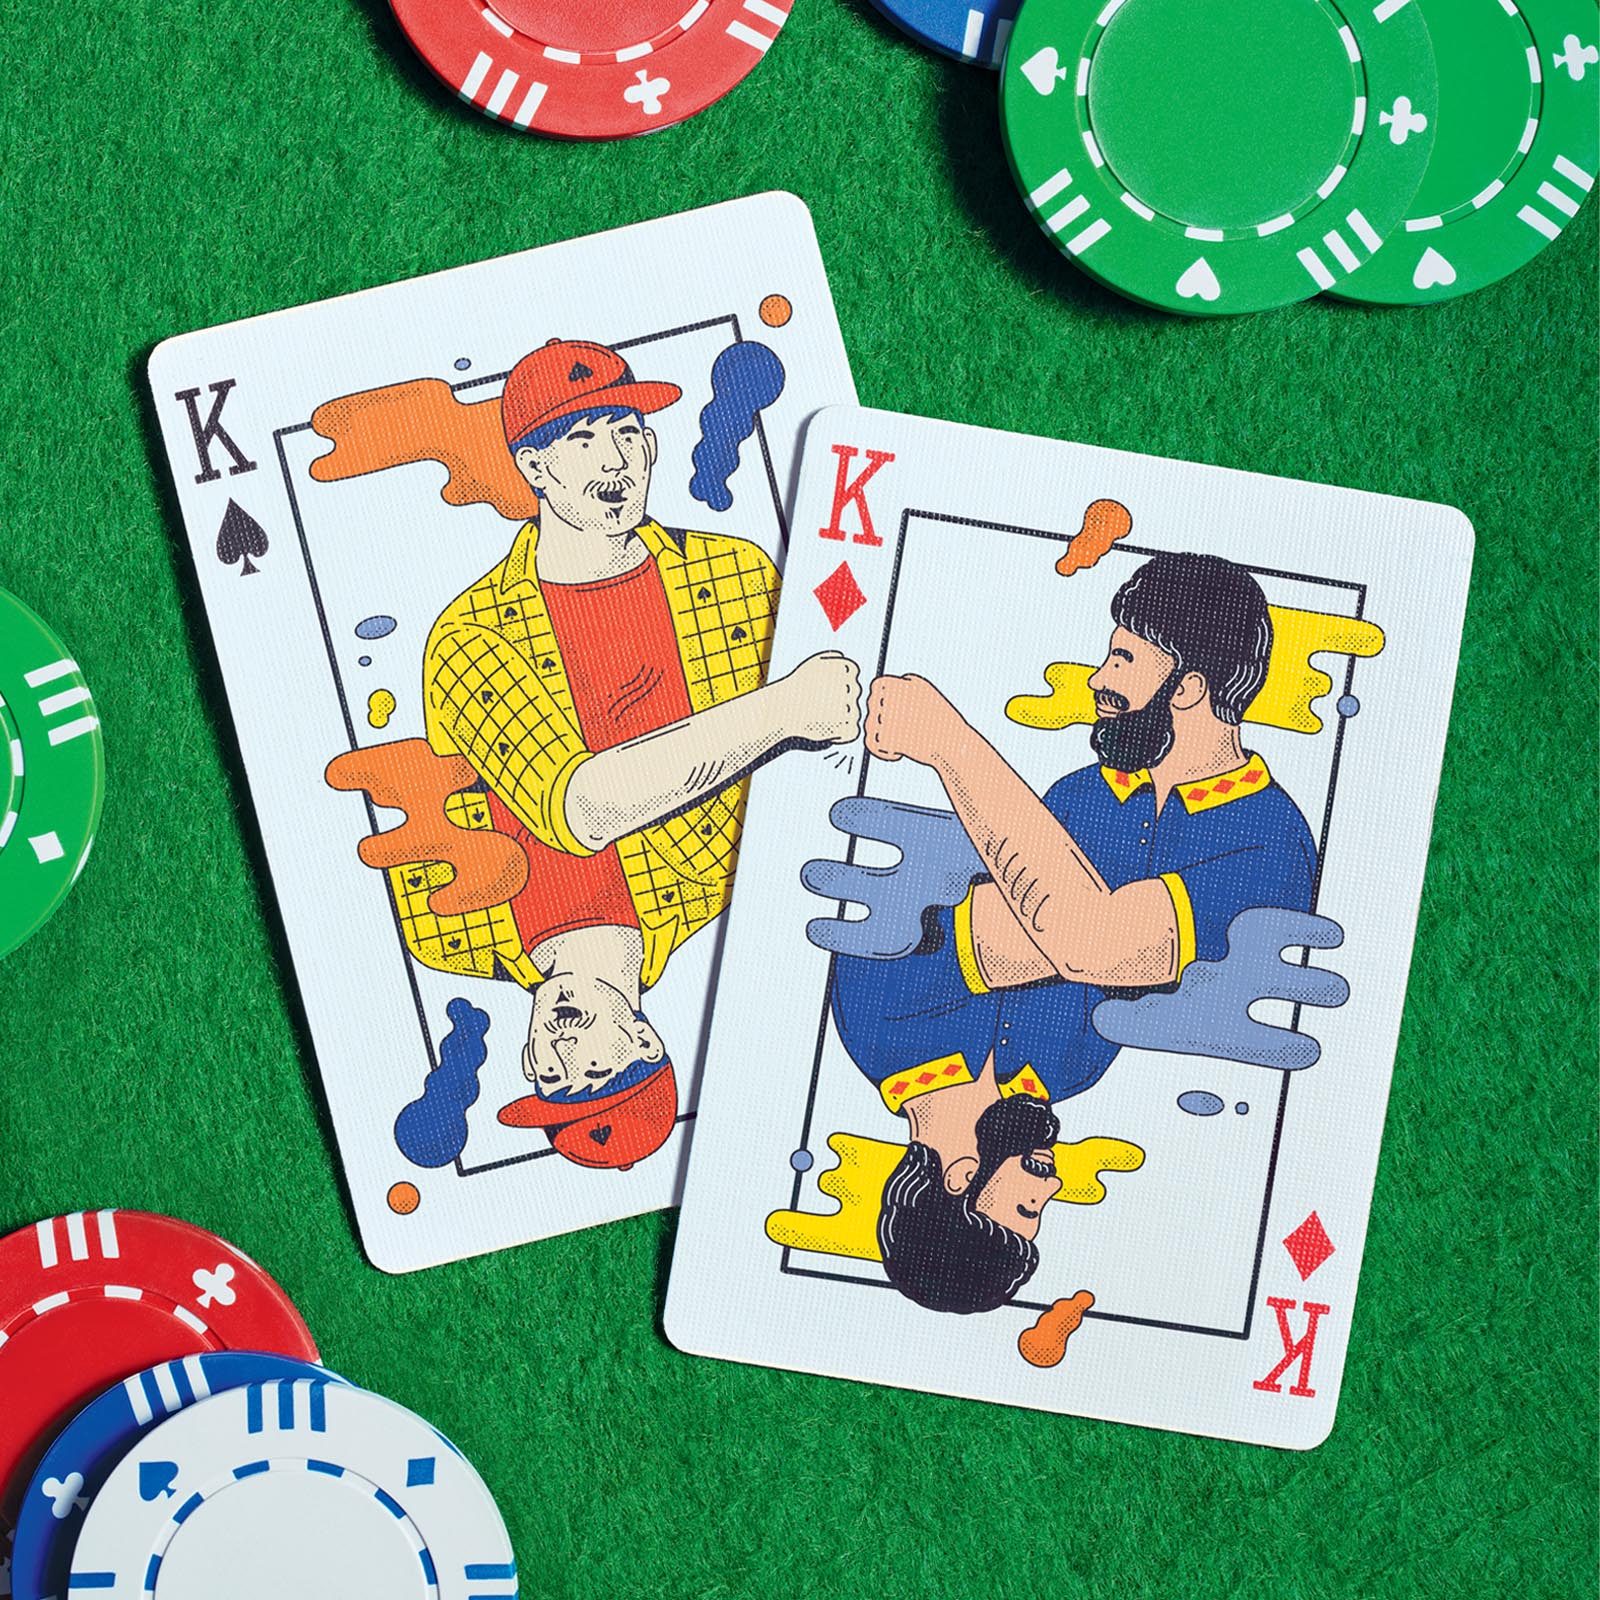 Playing cards with illustrations of two men giving each other a fist bump, with poker chips on a green poker table background